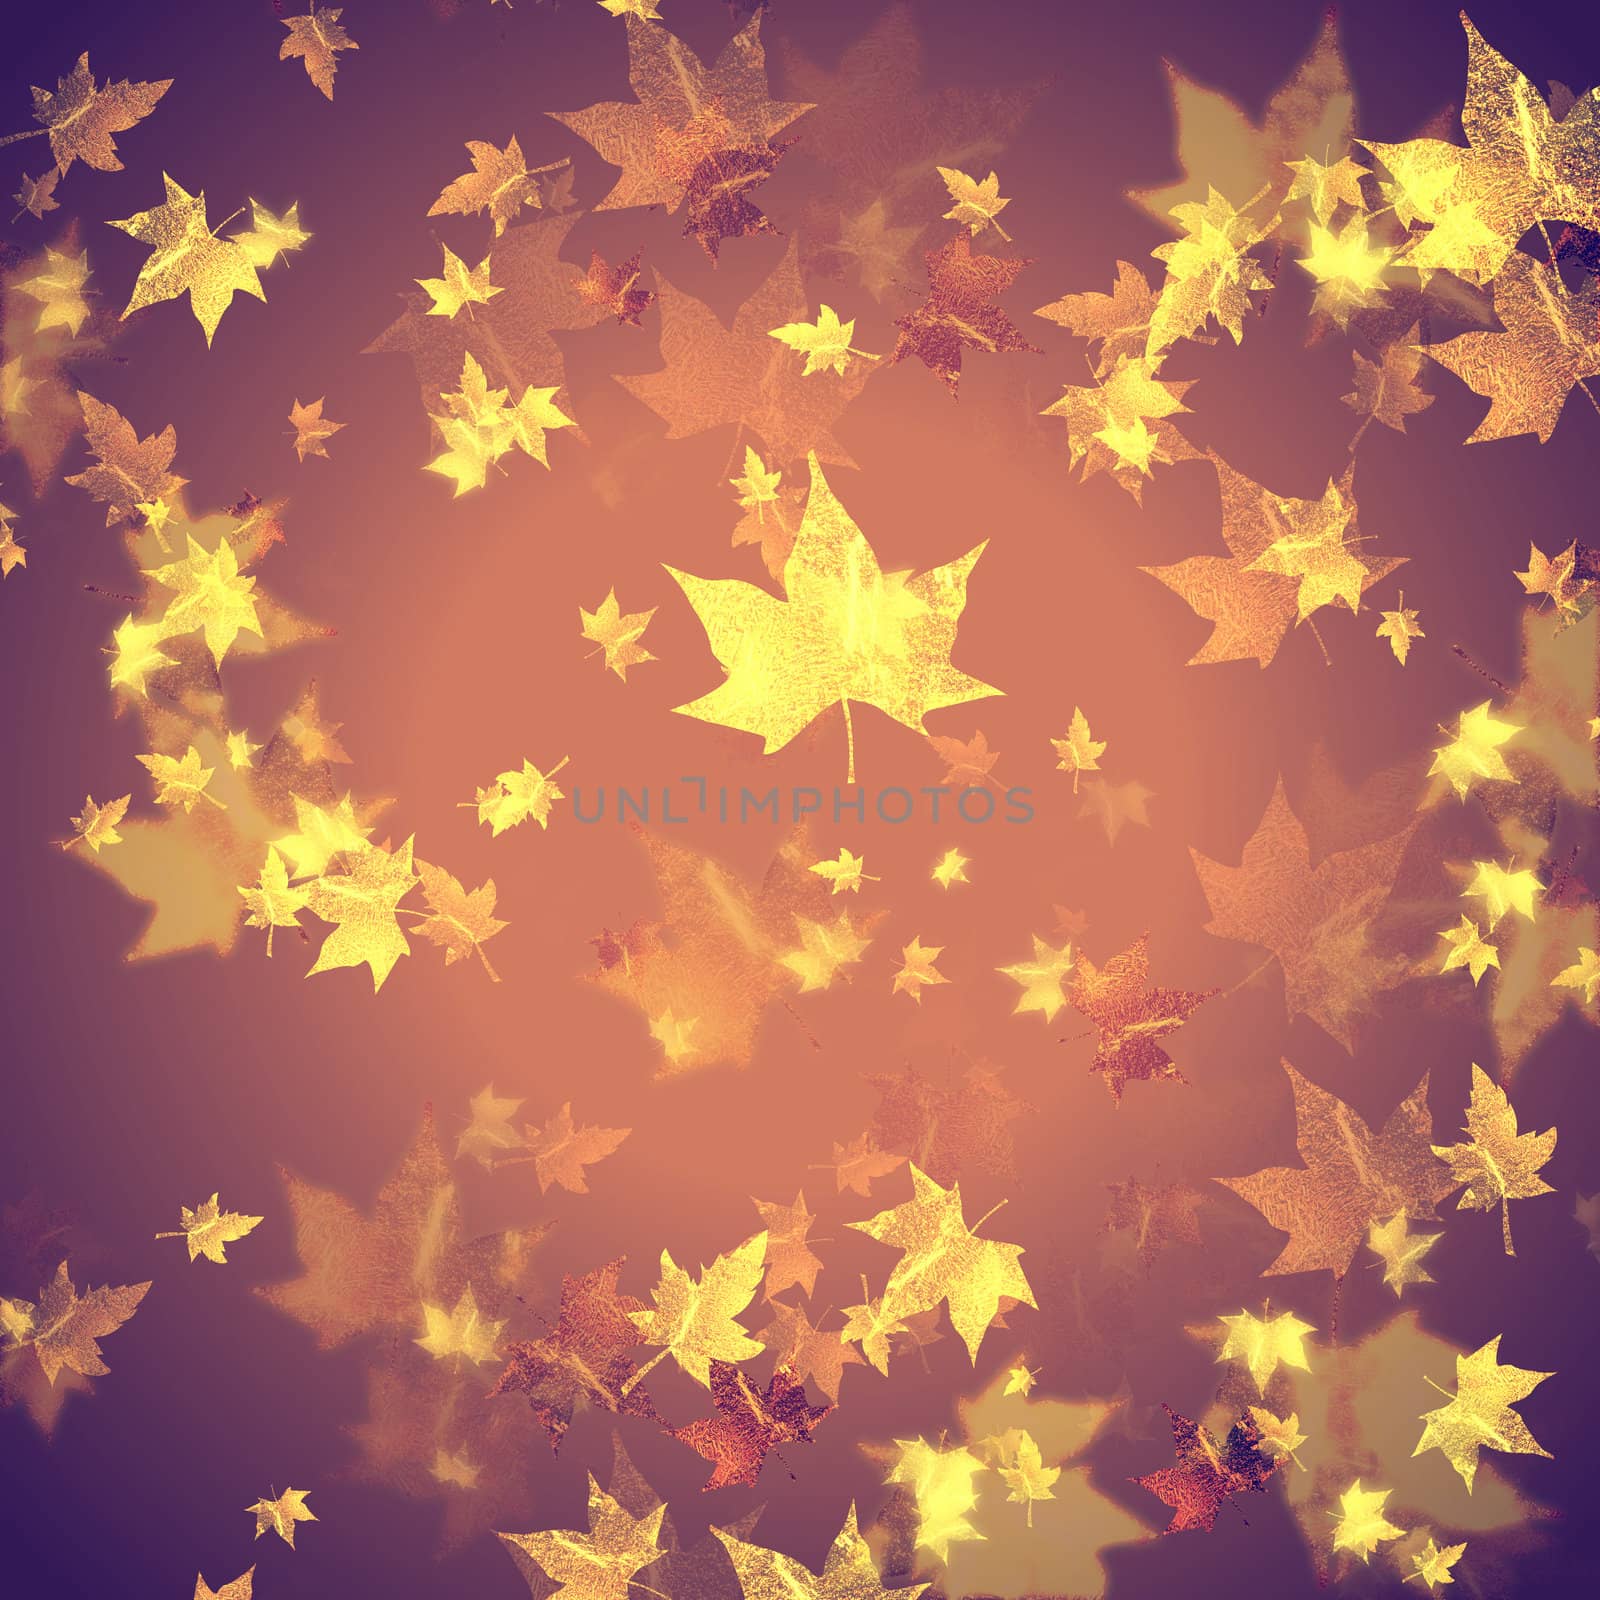 violet vintage background with shining autumn leaves
